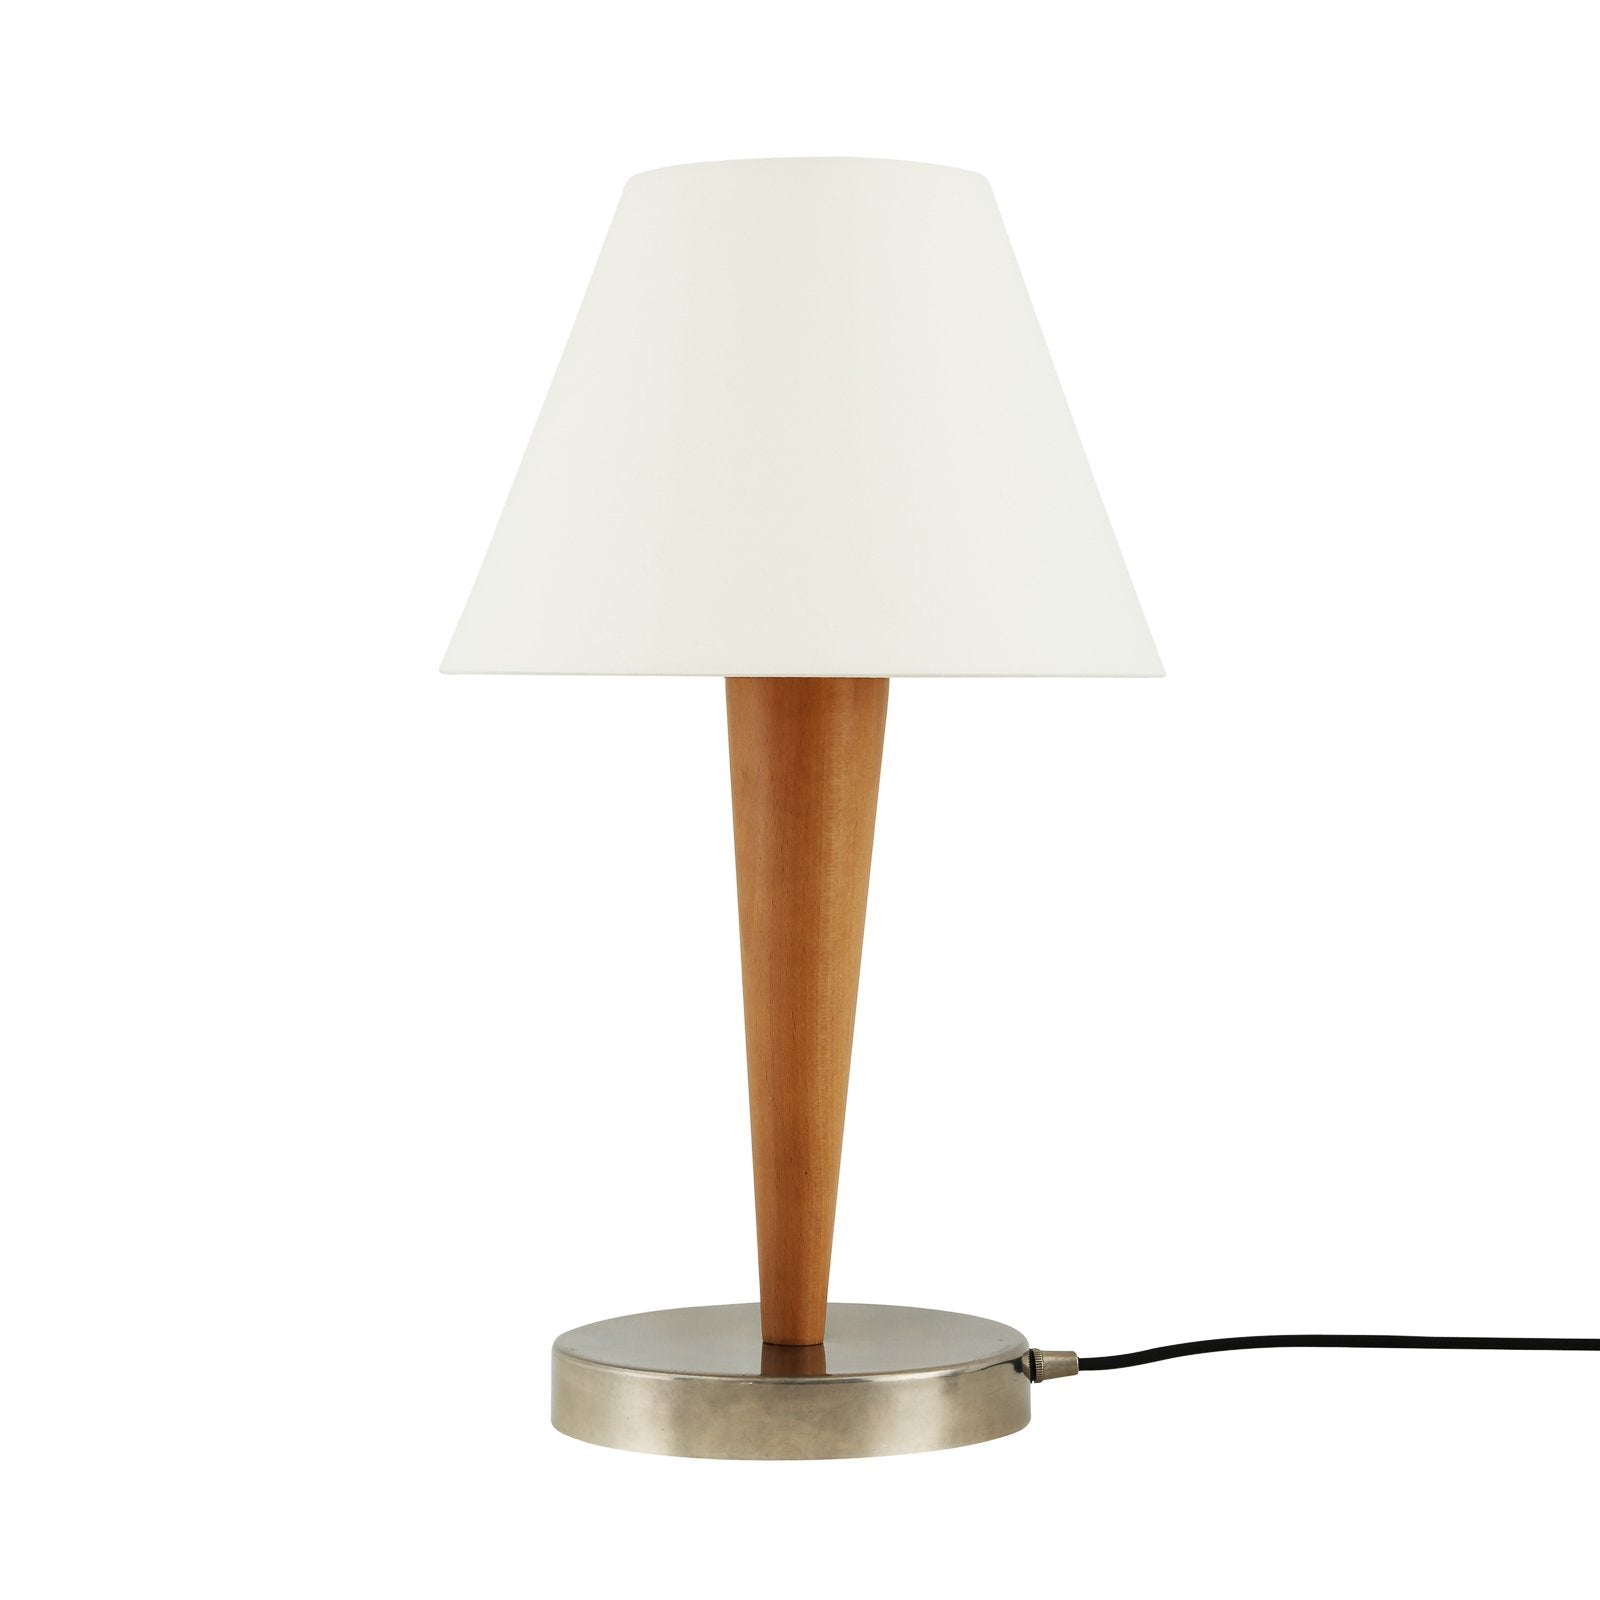 Perth Table Lamp - Table Lamps from RETROLIGHT. Made by Mullan Lighting.